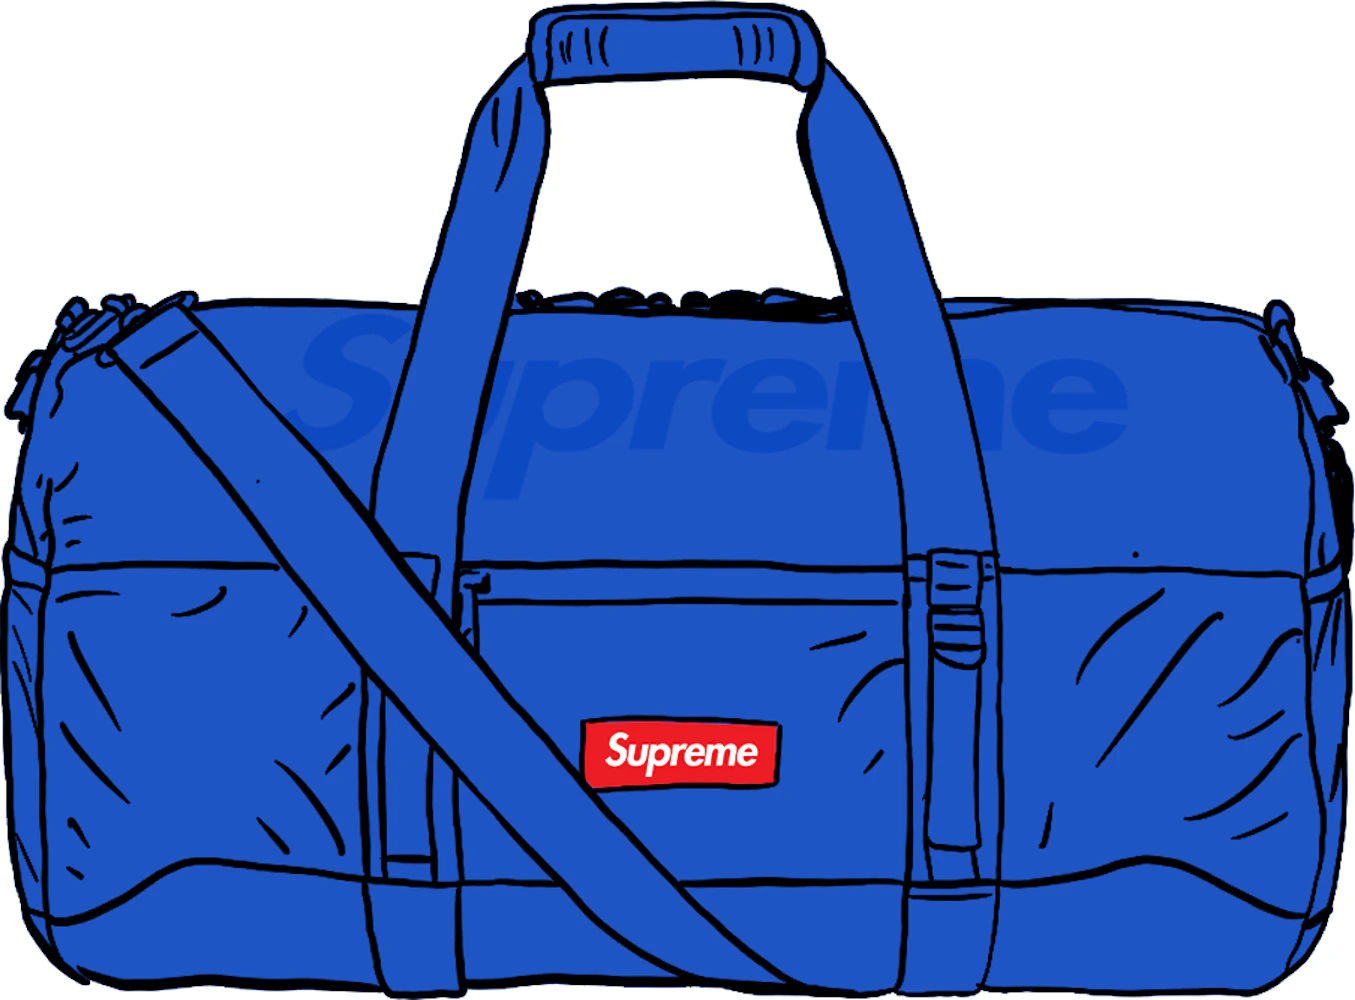 WTS] Used Supreme SS19 Light Blue Duffle Bag $140 OBO and Random Stickers  for $2-4 Each, $150 for everything if bought together : r/Supreme